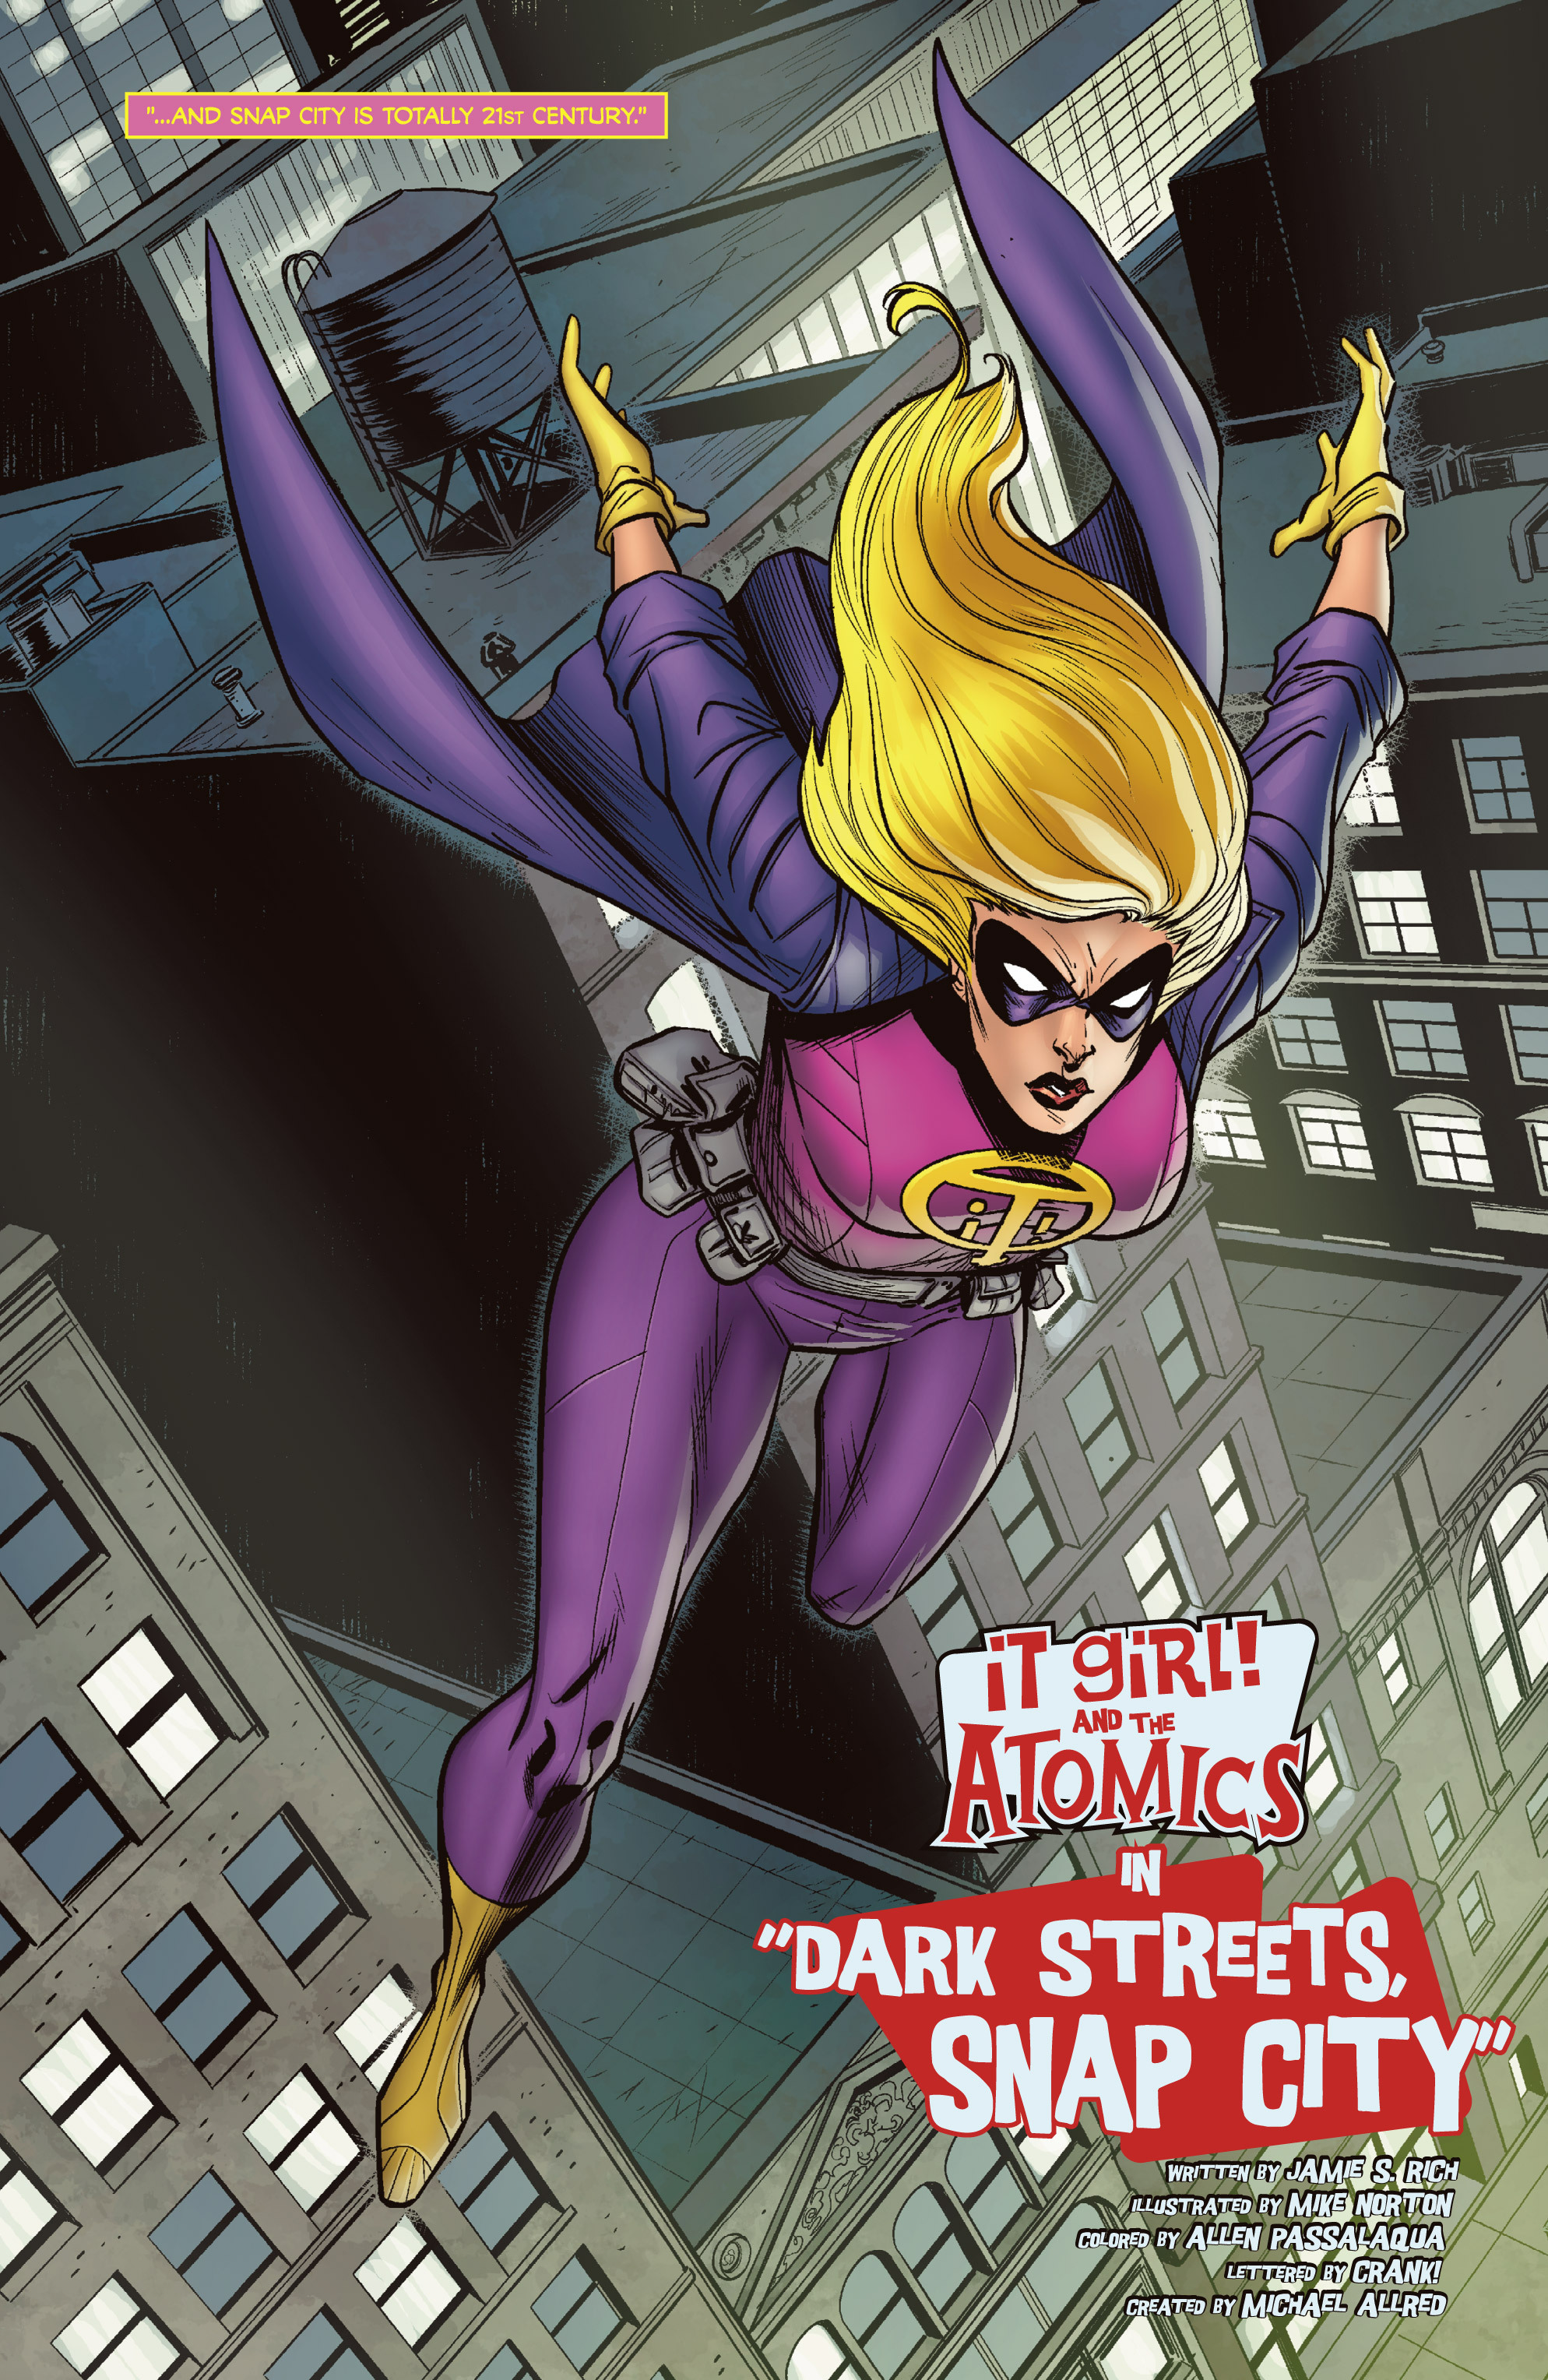 Read online It Girl! and the Atomics comic -  Issue # TPB 1 - 10